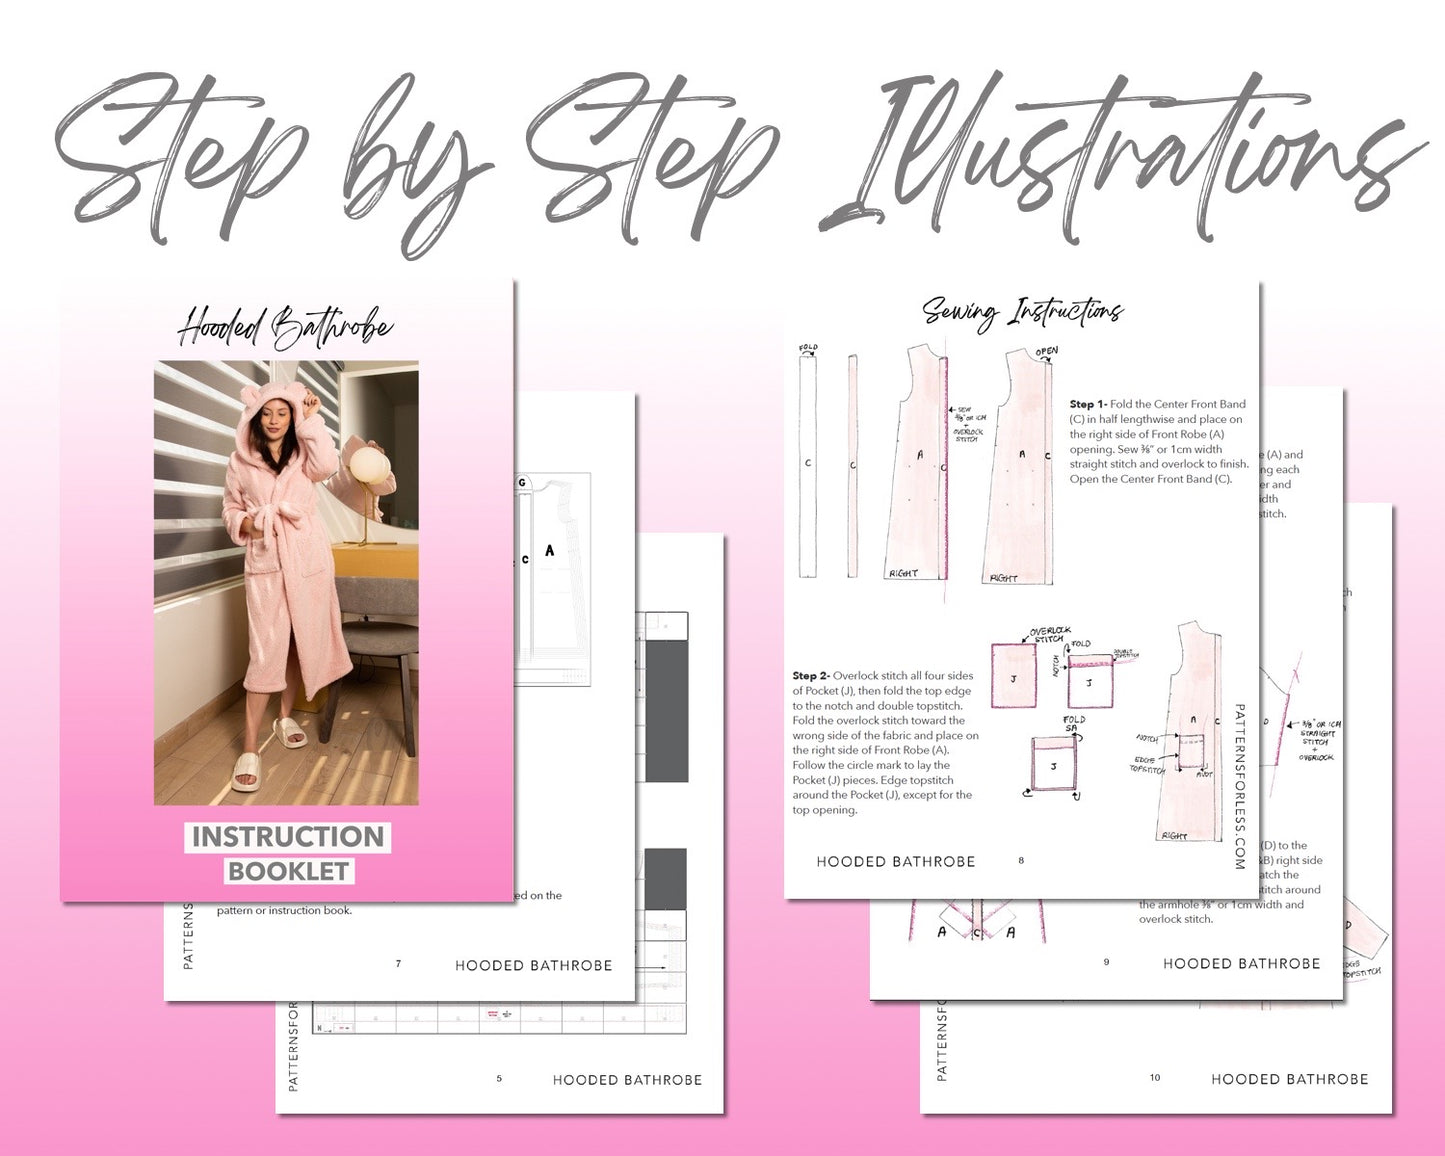 Hooded Bathrobe sewing pattern step by step illustrations.